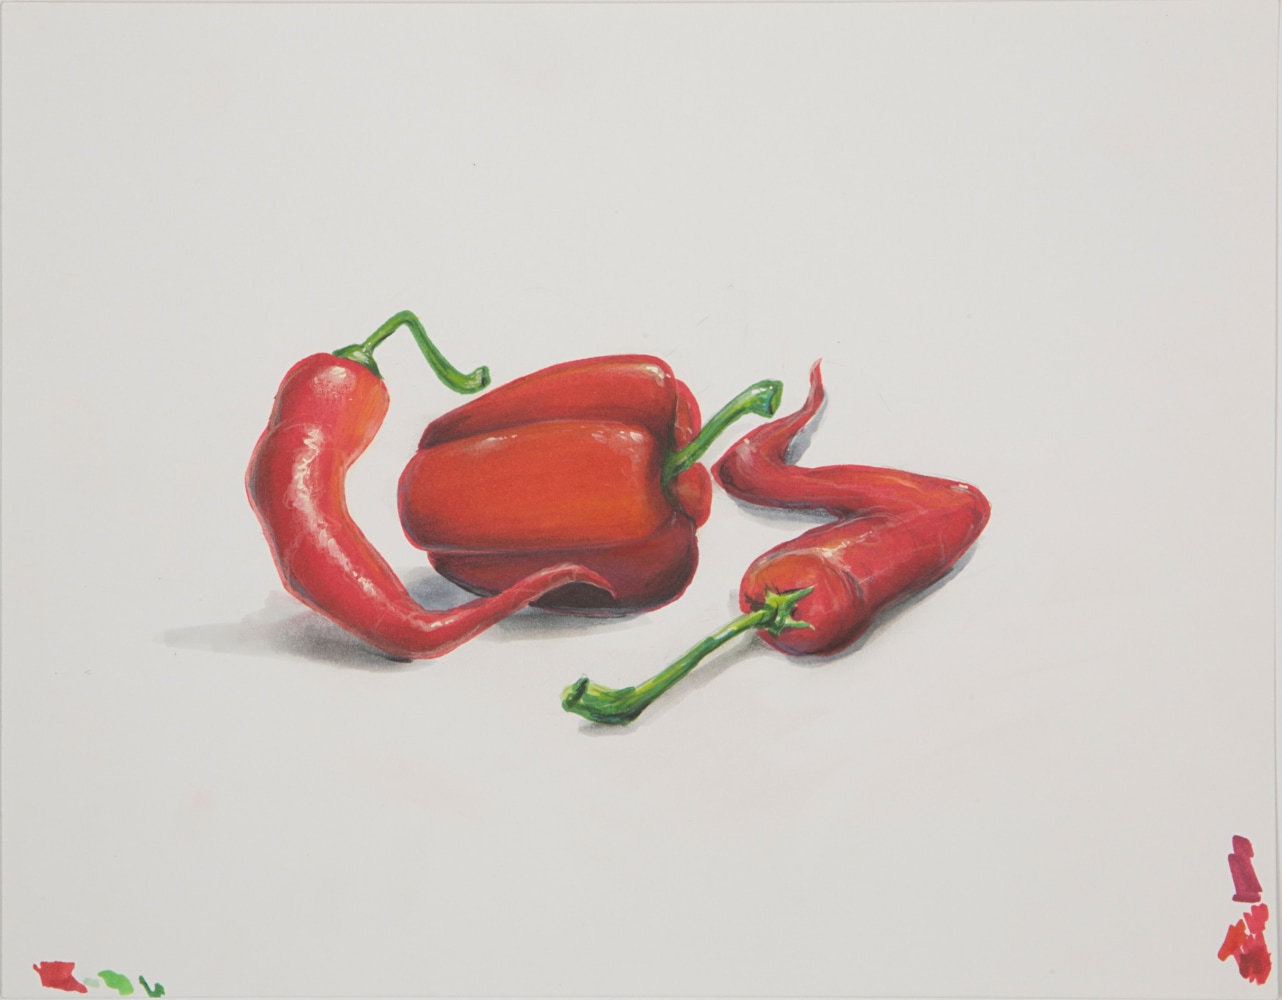 Hot Pepper, 2015
Ink on paper
11 x 14 Inches